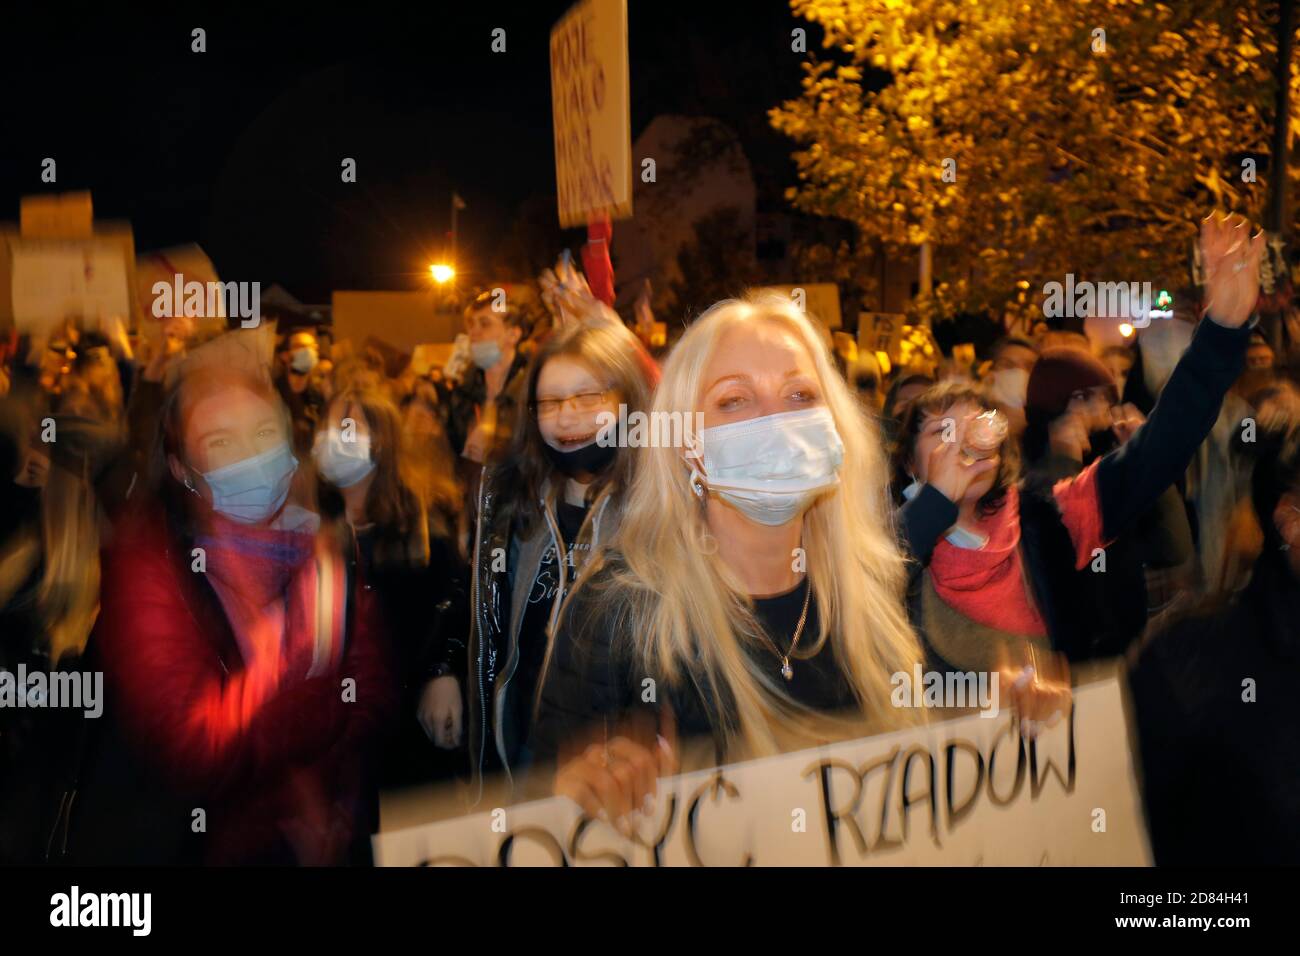 Few thousand crowd of young people mainly, protested against the tightening of the anti-abortion regulations on October 26, 2020 in Katowice, Poland. Stock Photo